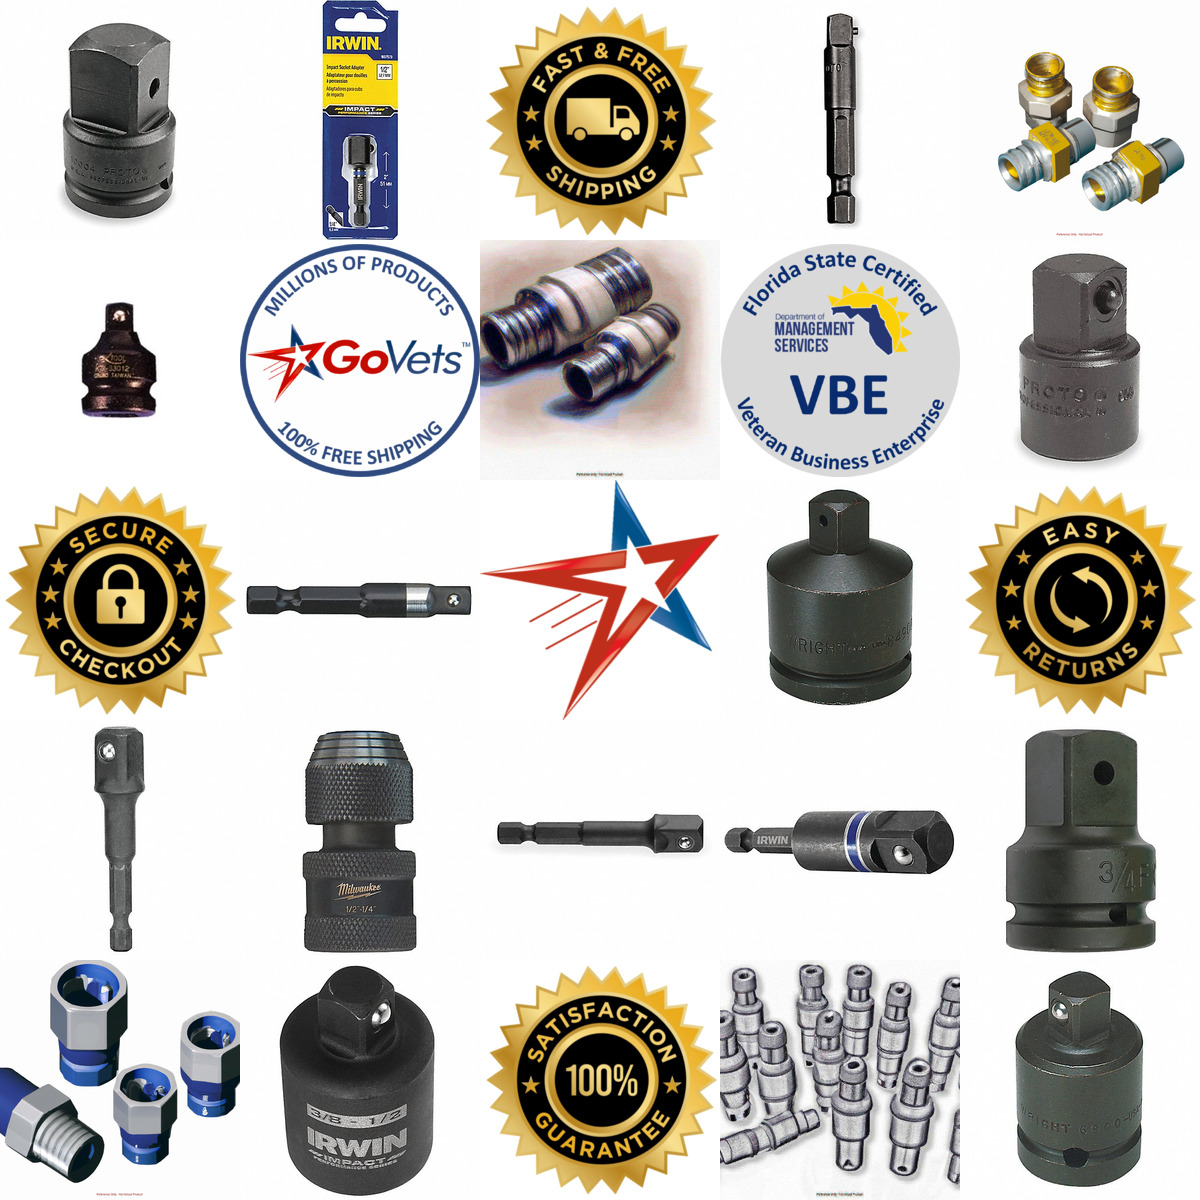 A selection of Impact Socket Adapters products on GoVets